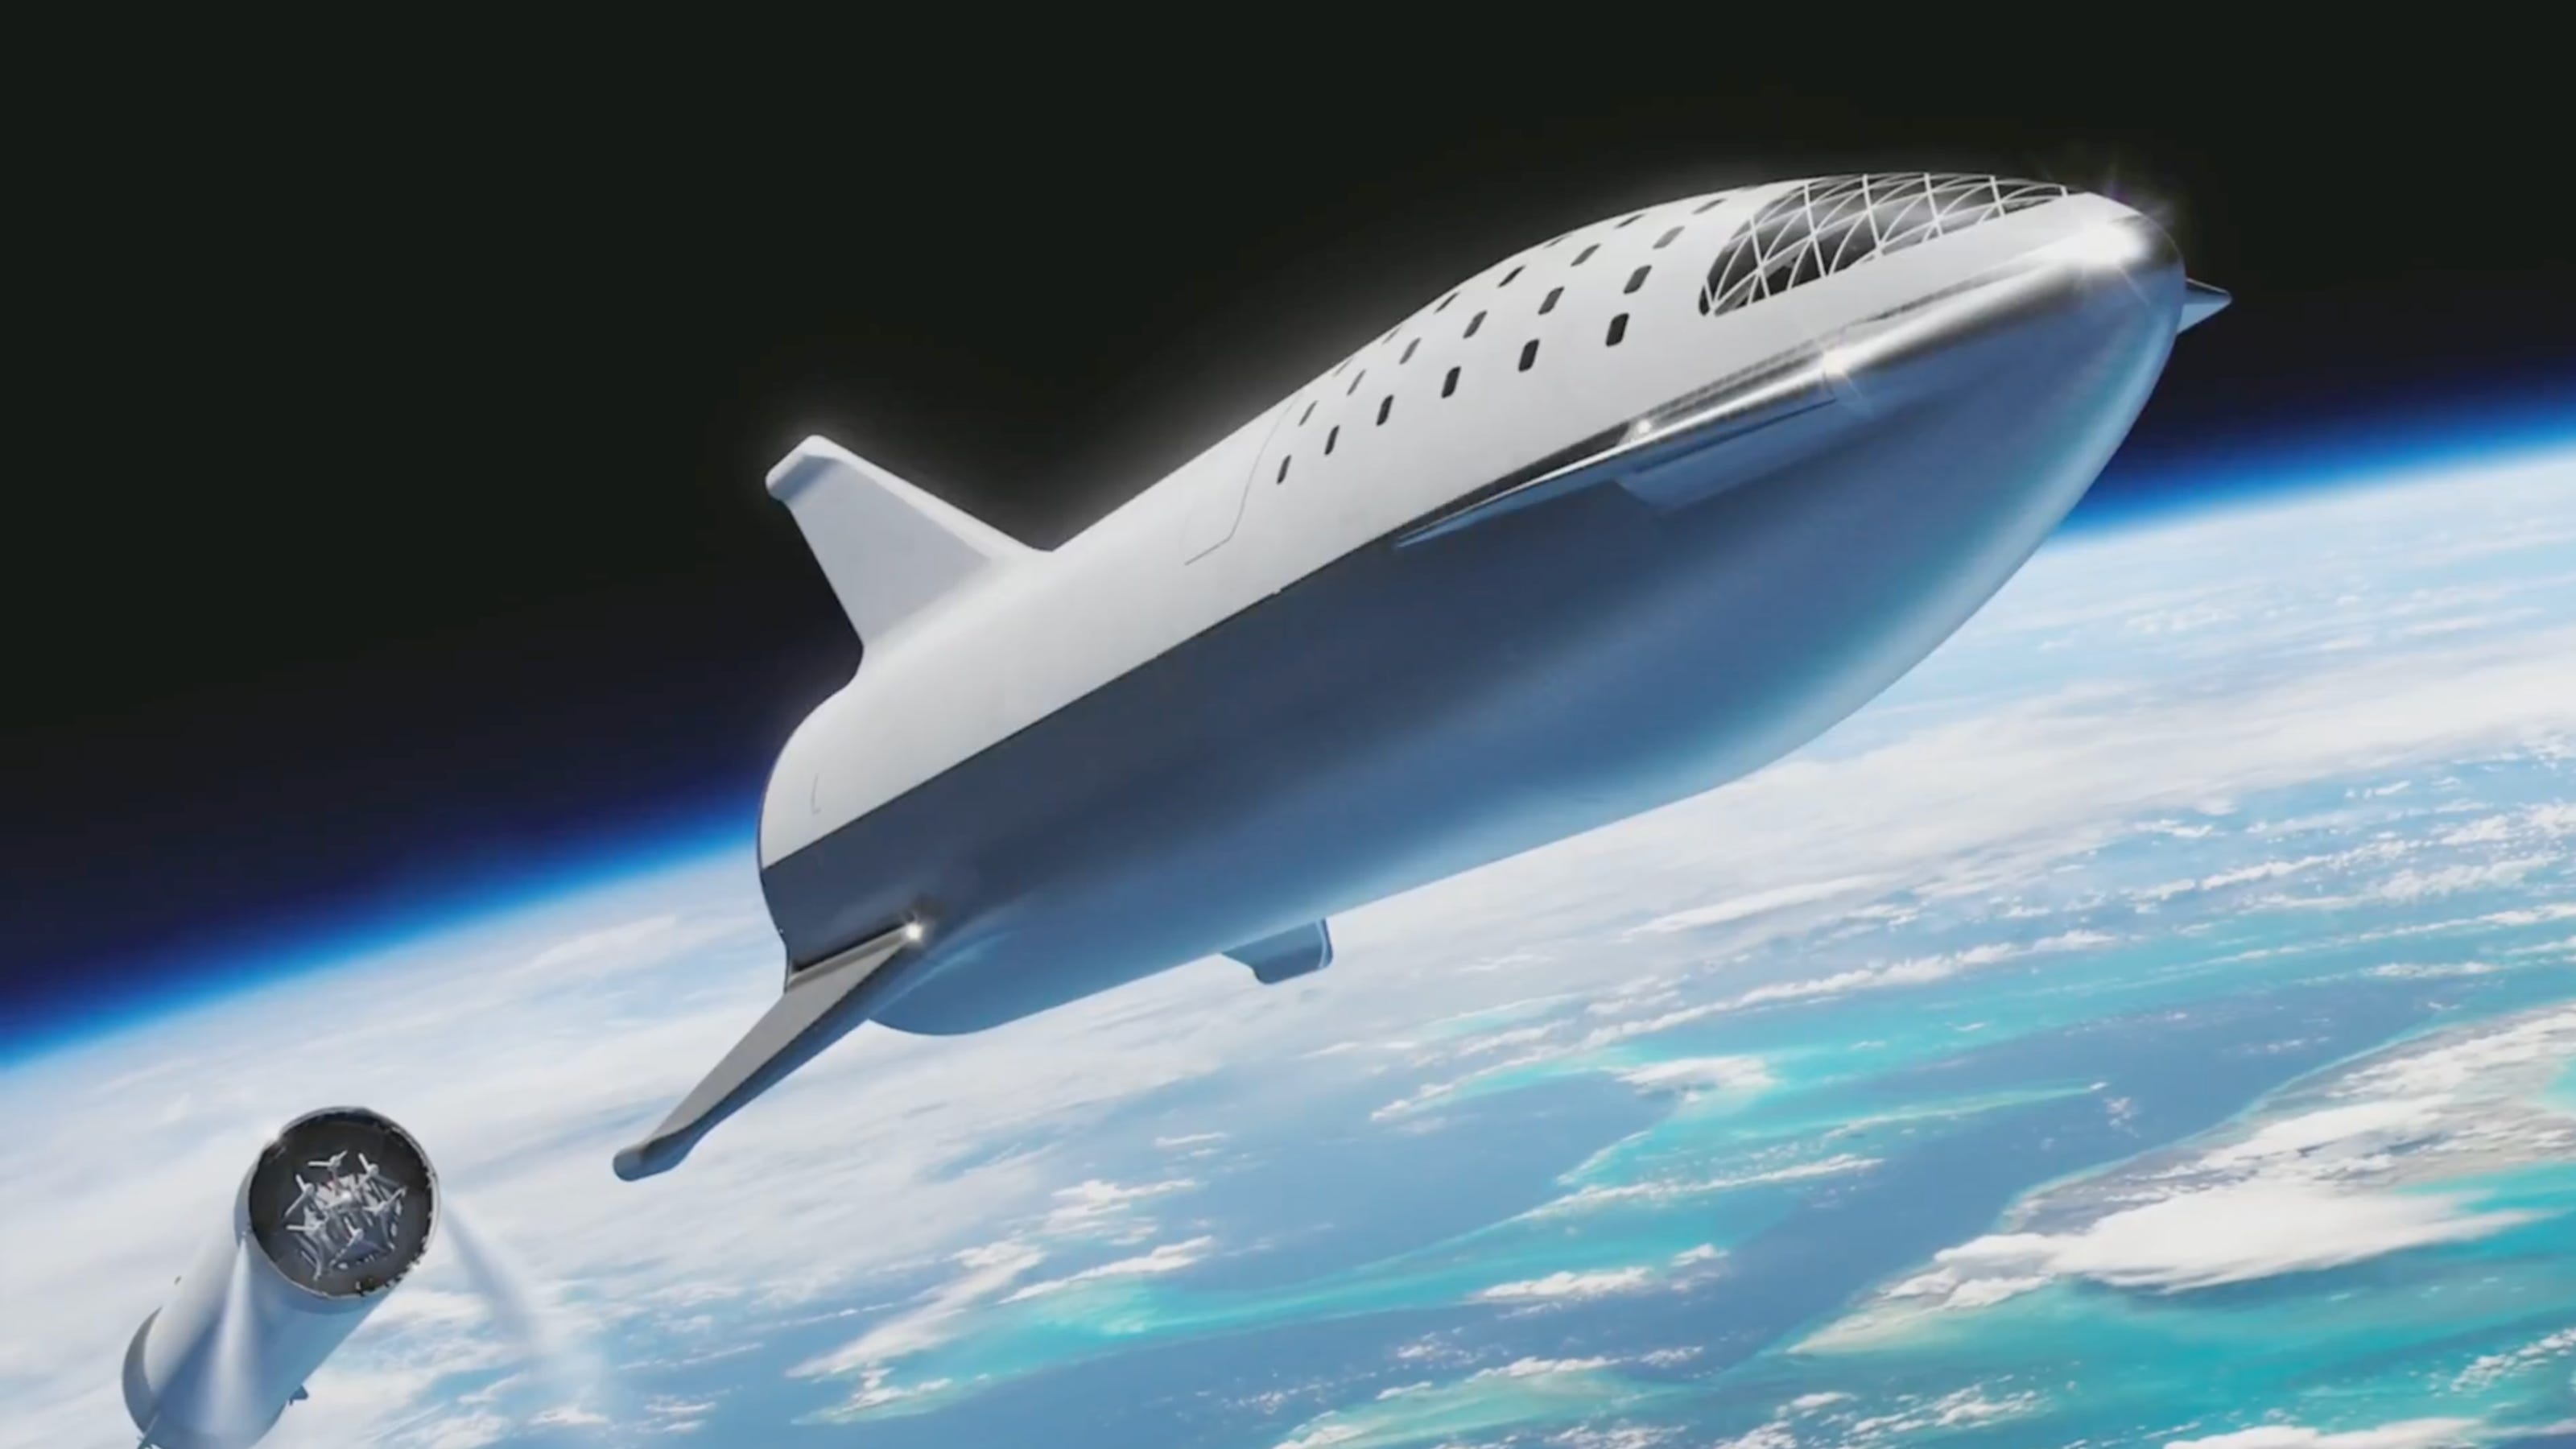 SpaceX's monster spaceship: What Elon Musk wants you to know